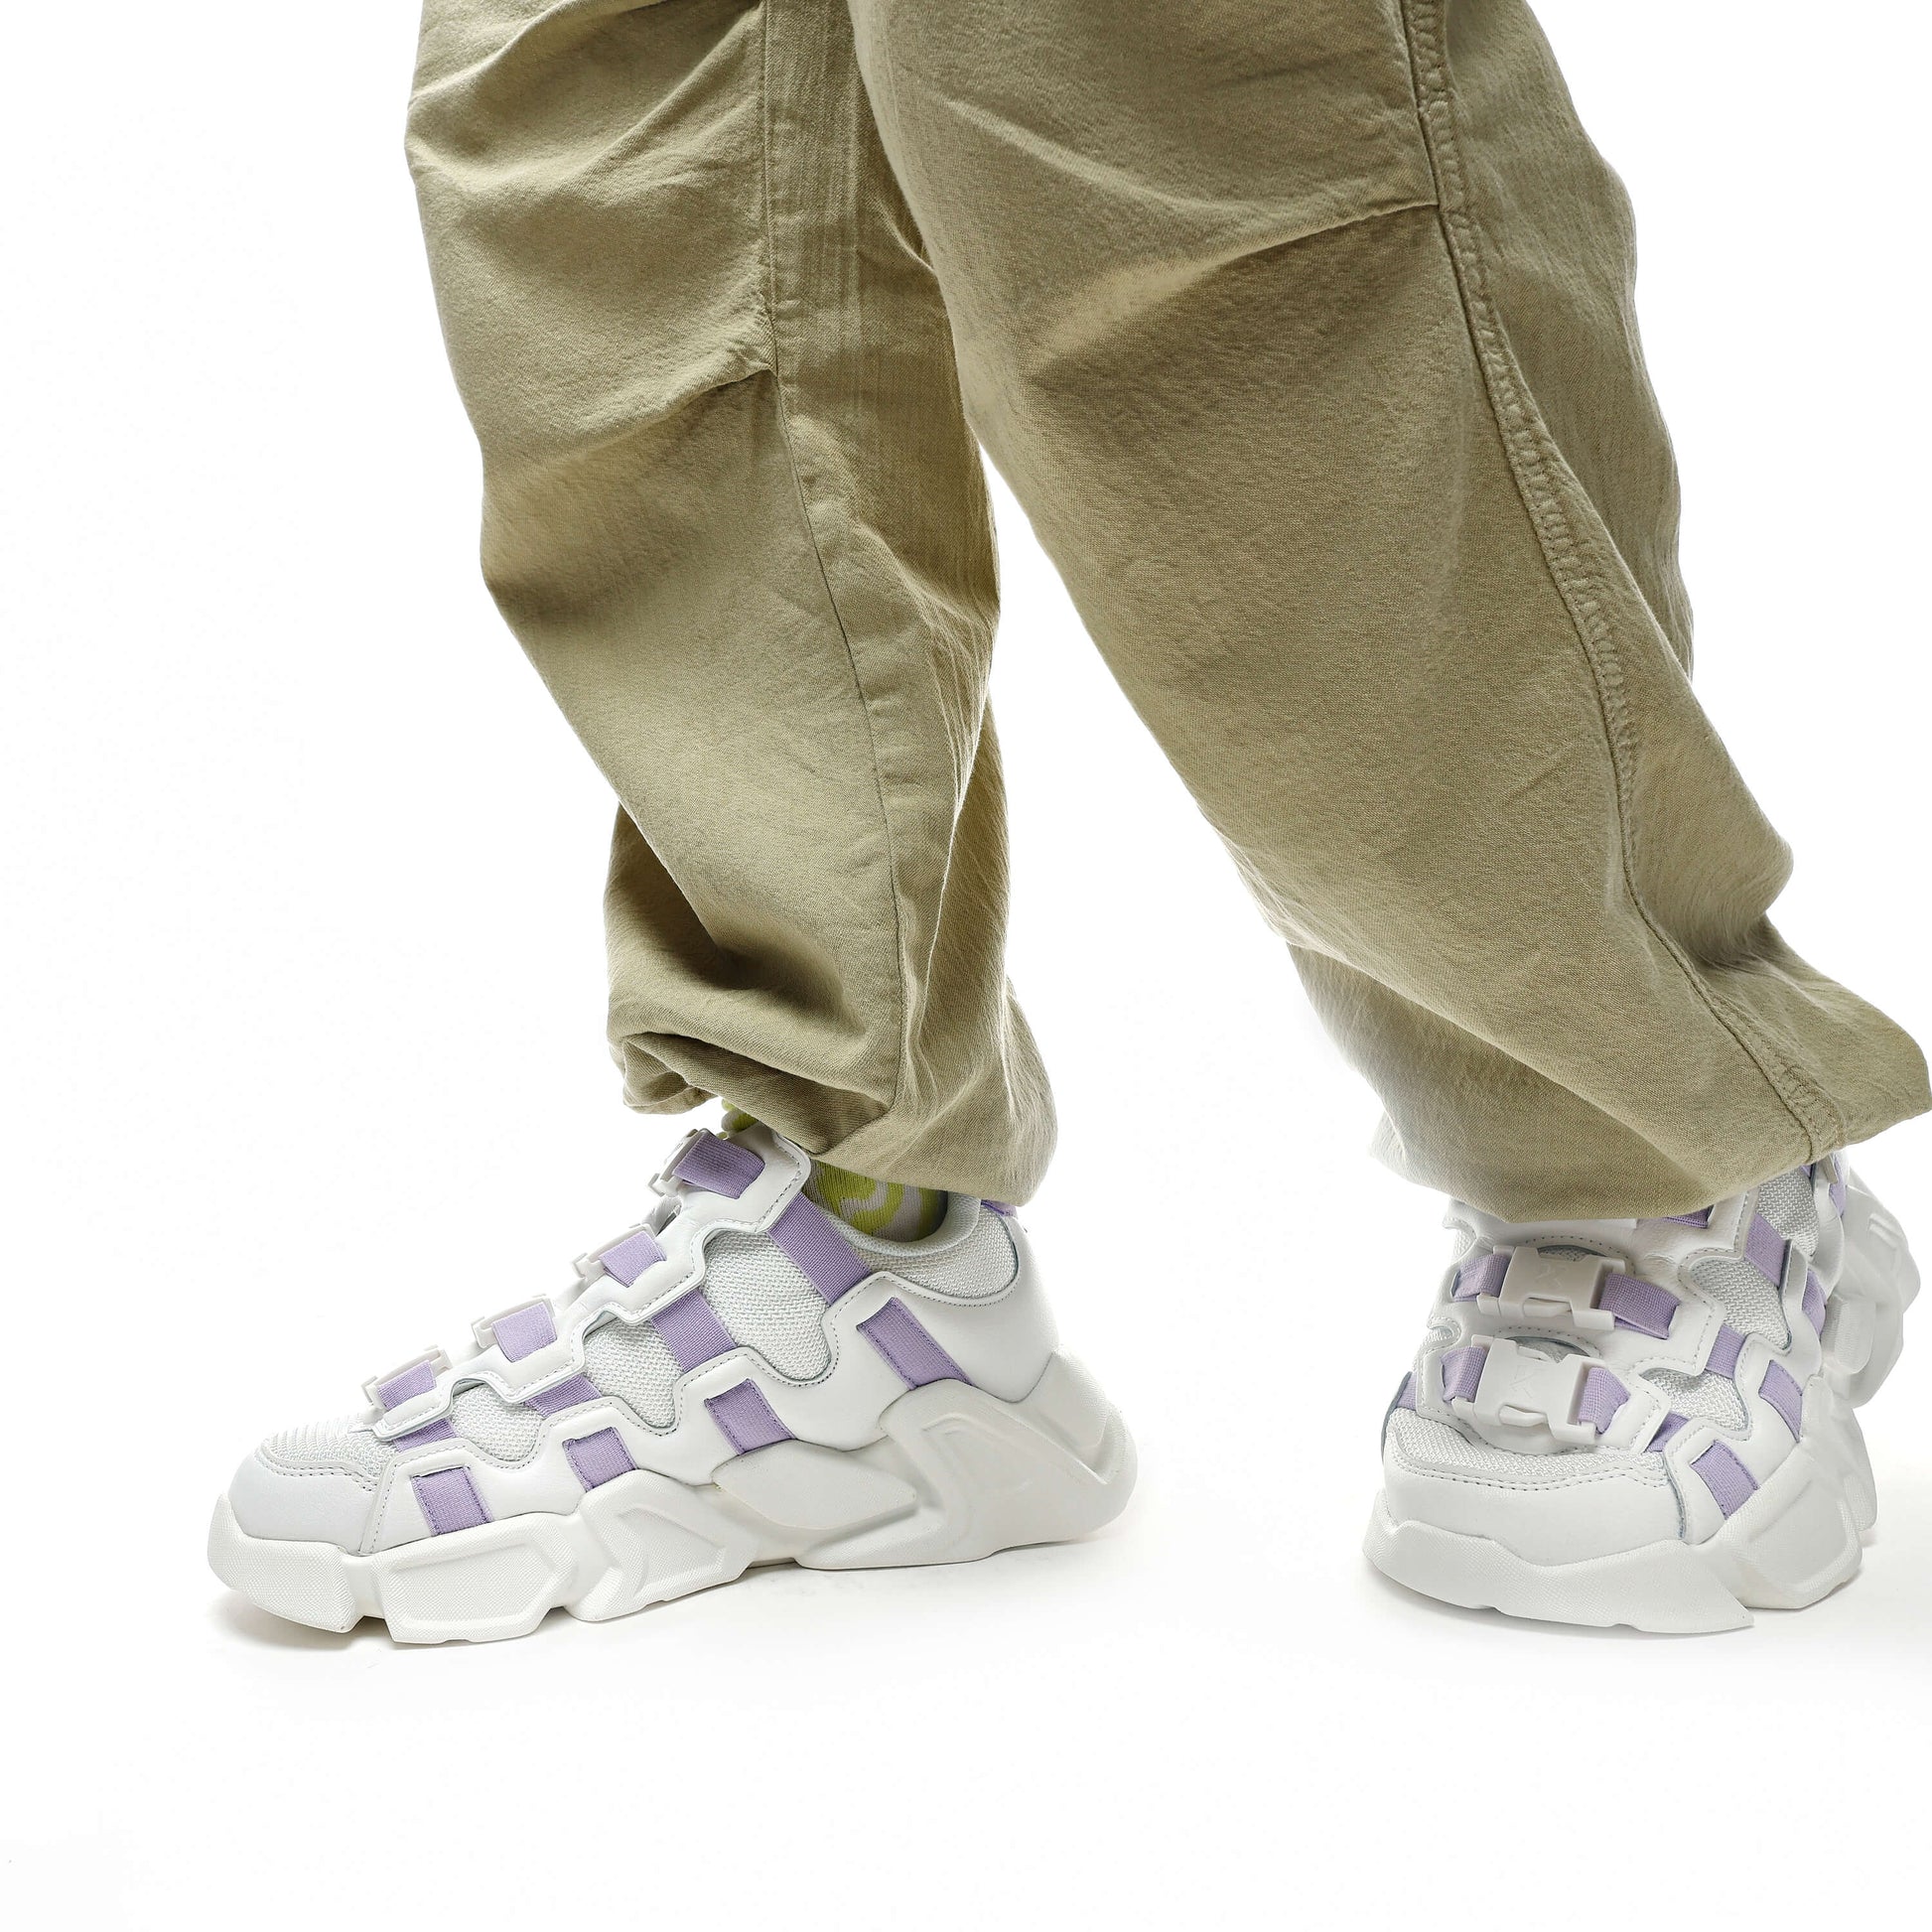 Lavender Sugar Beast Trainers - Trainers - KOI Footwear - White - Model Front View